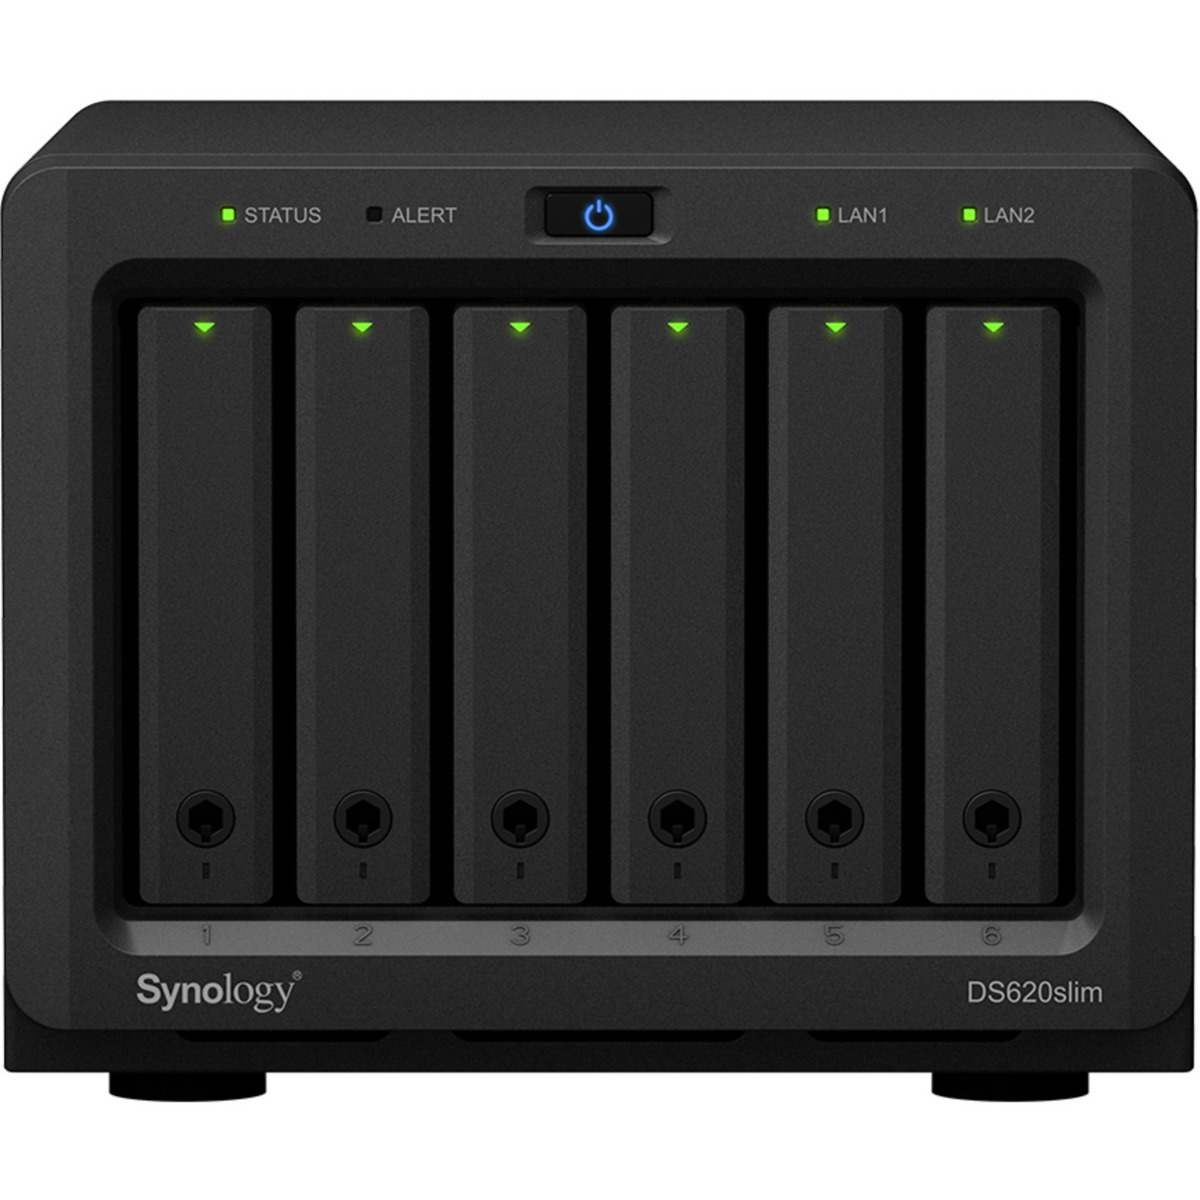 Synology DiskStation DS620slim 12tb 6-Bay Desktop Multimedia / Power User / Business NAS - Network Attached Storage Device 6x2tb Samsung 870 QVO MZ-77Q2T0 2.5 560/530MB/s SATA 6Gb/s SSD CONSUMER Class Drives Installed - Burn-In Tested - FREE RAM UPGRADE DiskStation DS620slim